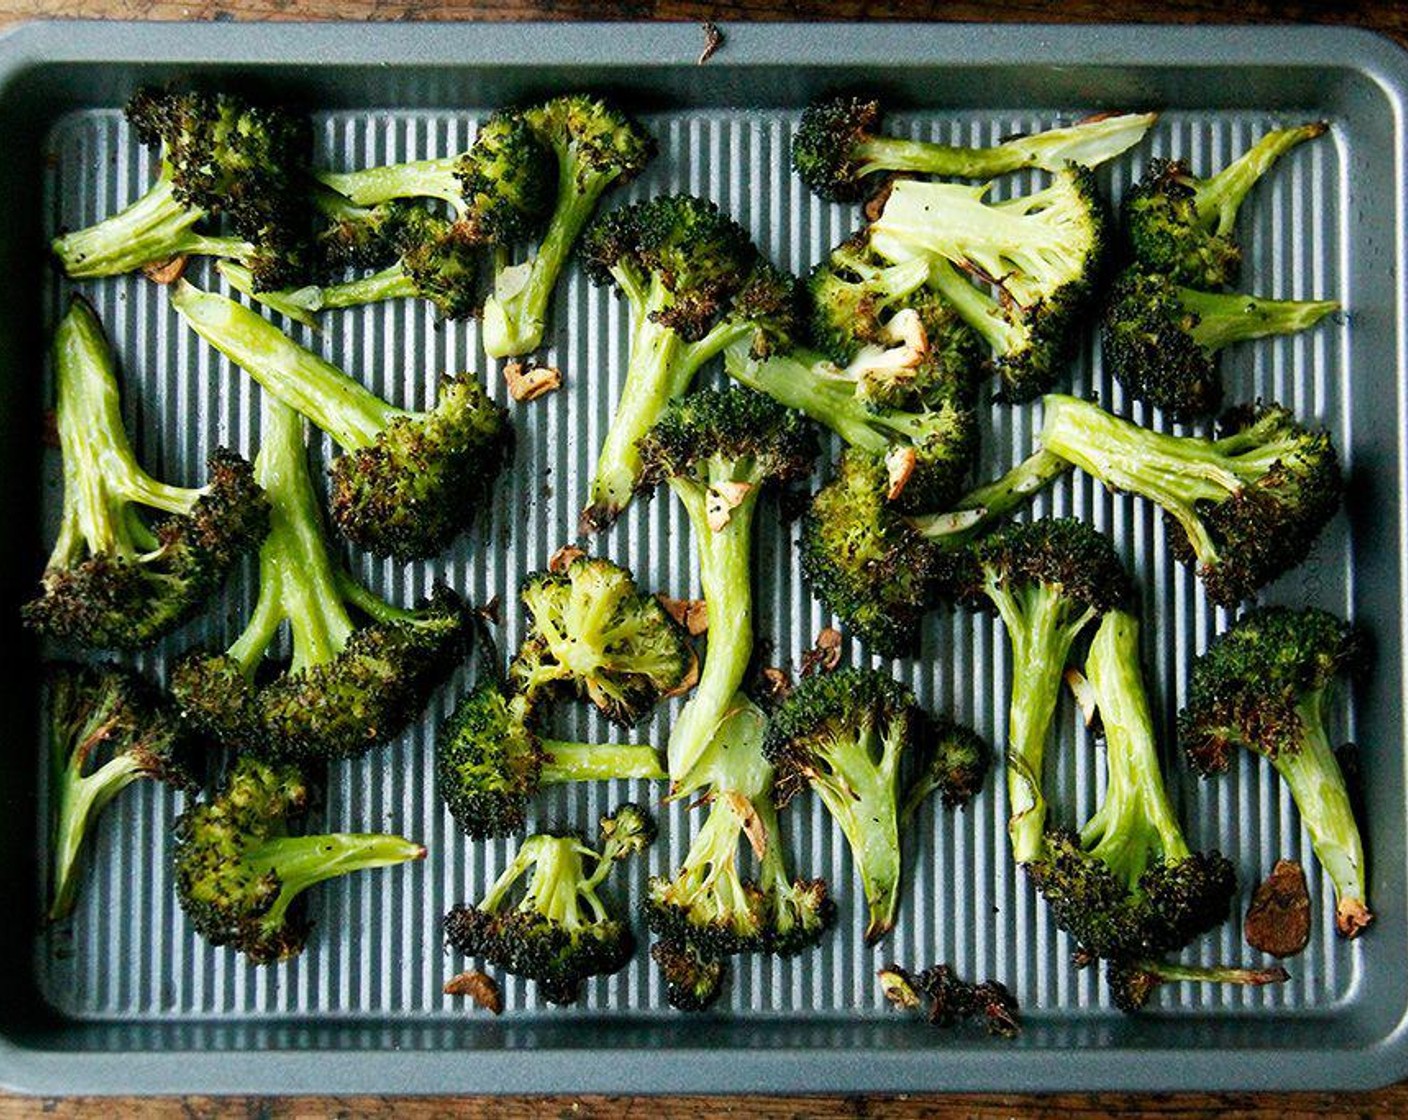 step 4 Roast for 20 to 25 minutes, until the broccoli is crisp-tender and the tips of some of the florets are browned.